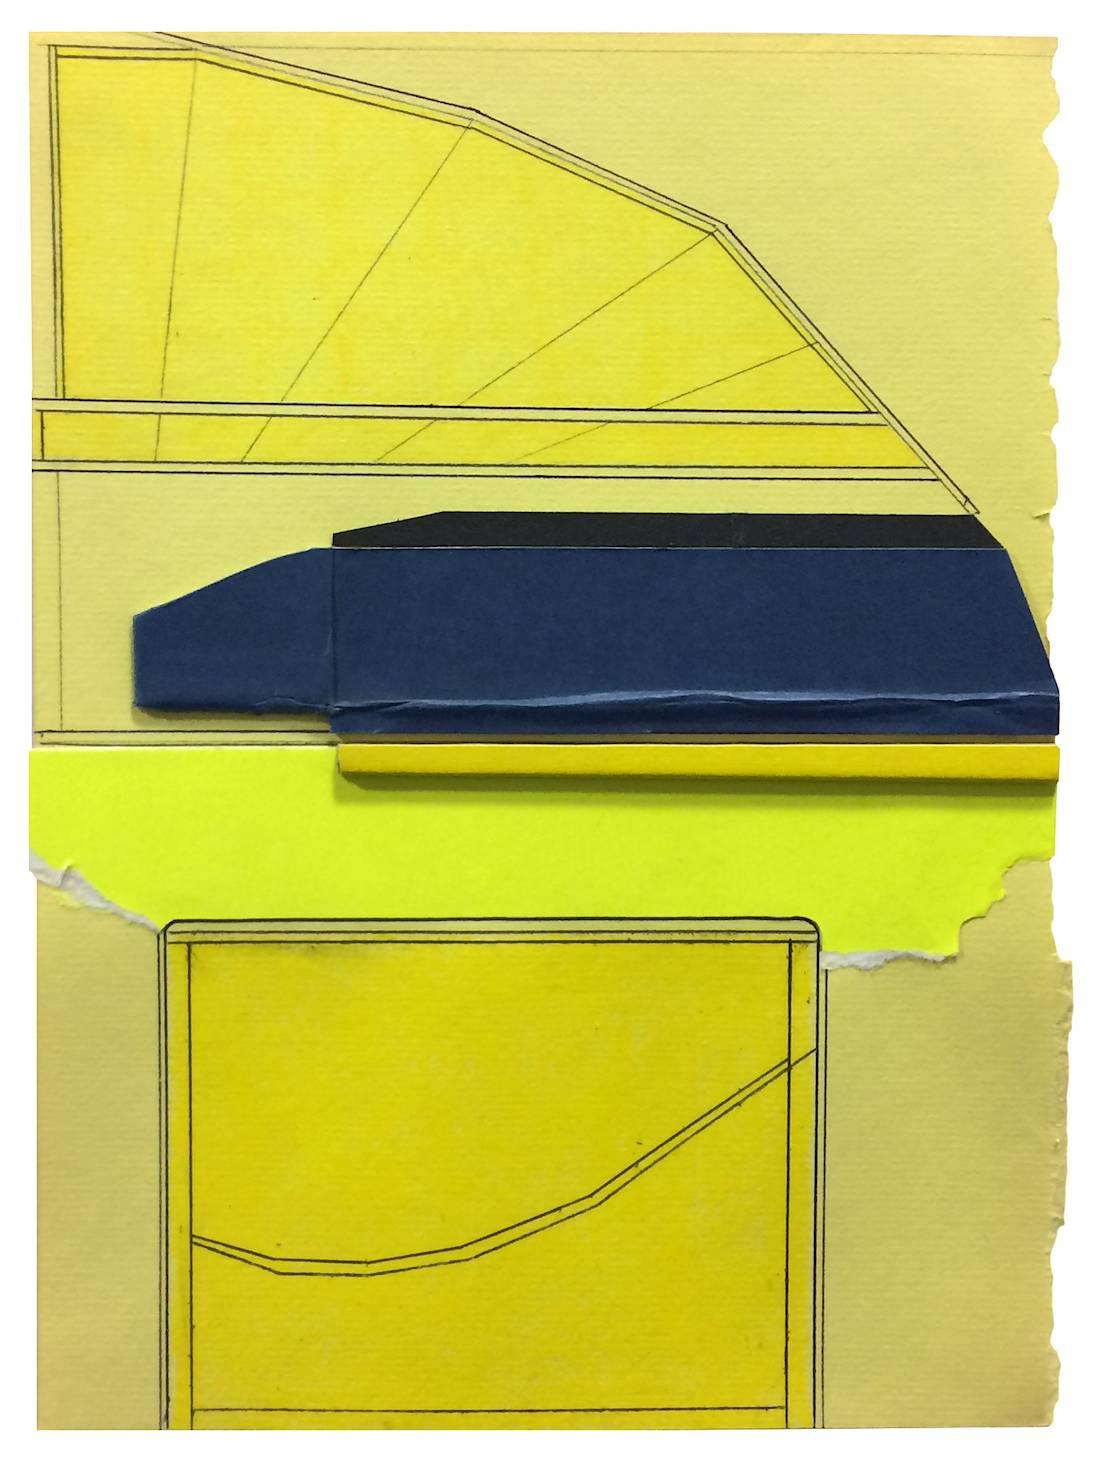 Ryan Sarah Murphy Abstract Sculpture - “All-Division 5”, yellow and black collaged architectural wall relief